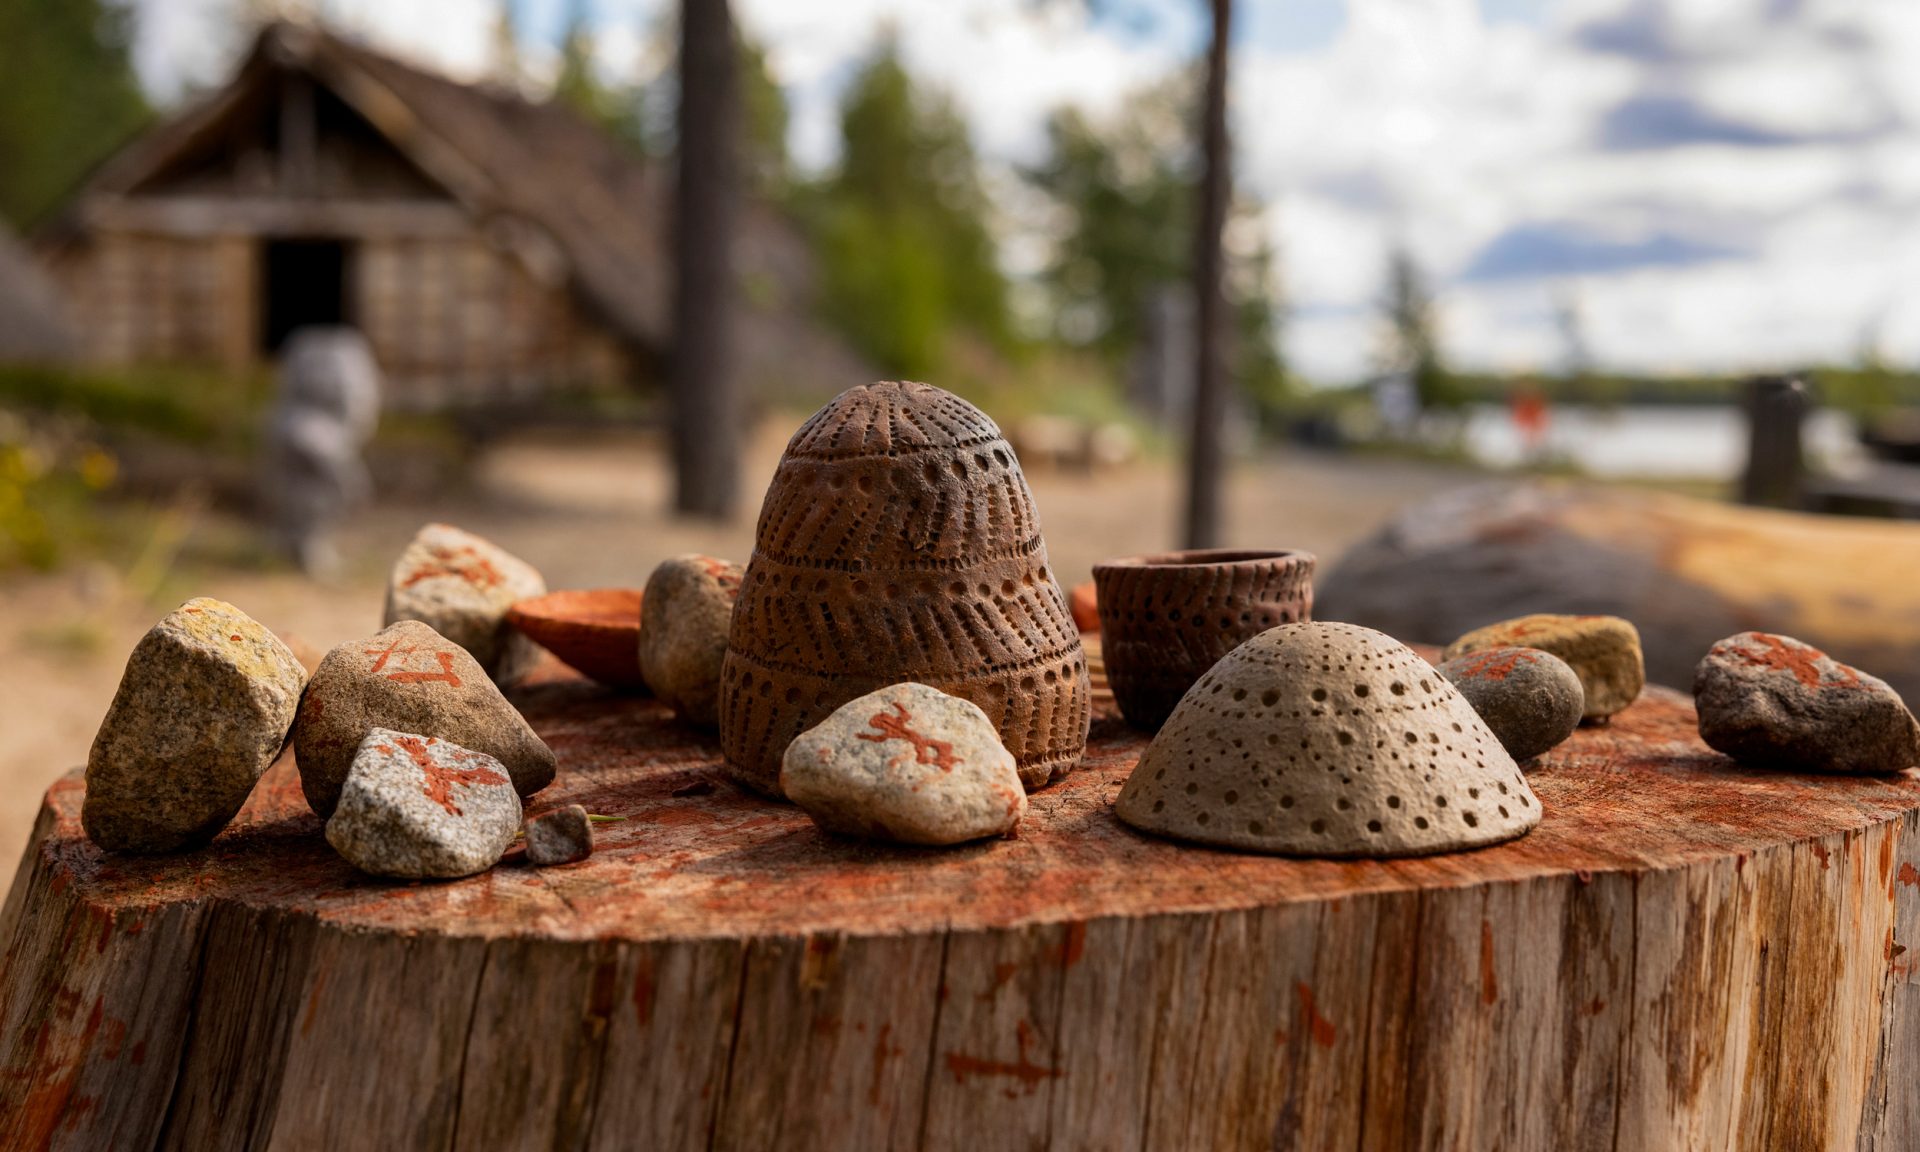 Stones and pottery objects arranged on a large stump in a Stone Age village. Patterns have been painted on the stones with red mud paint.